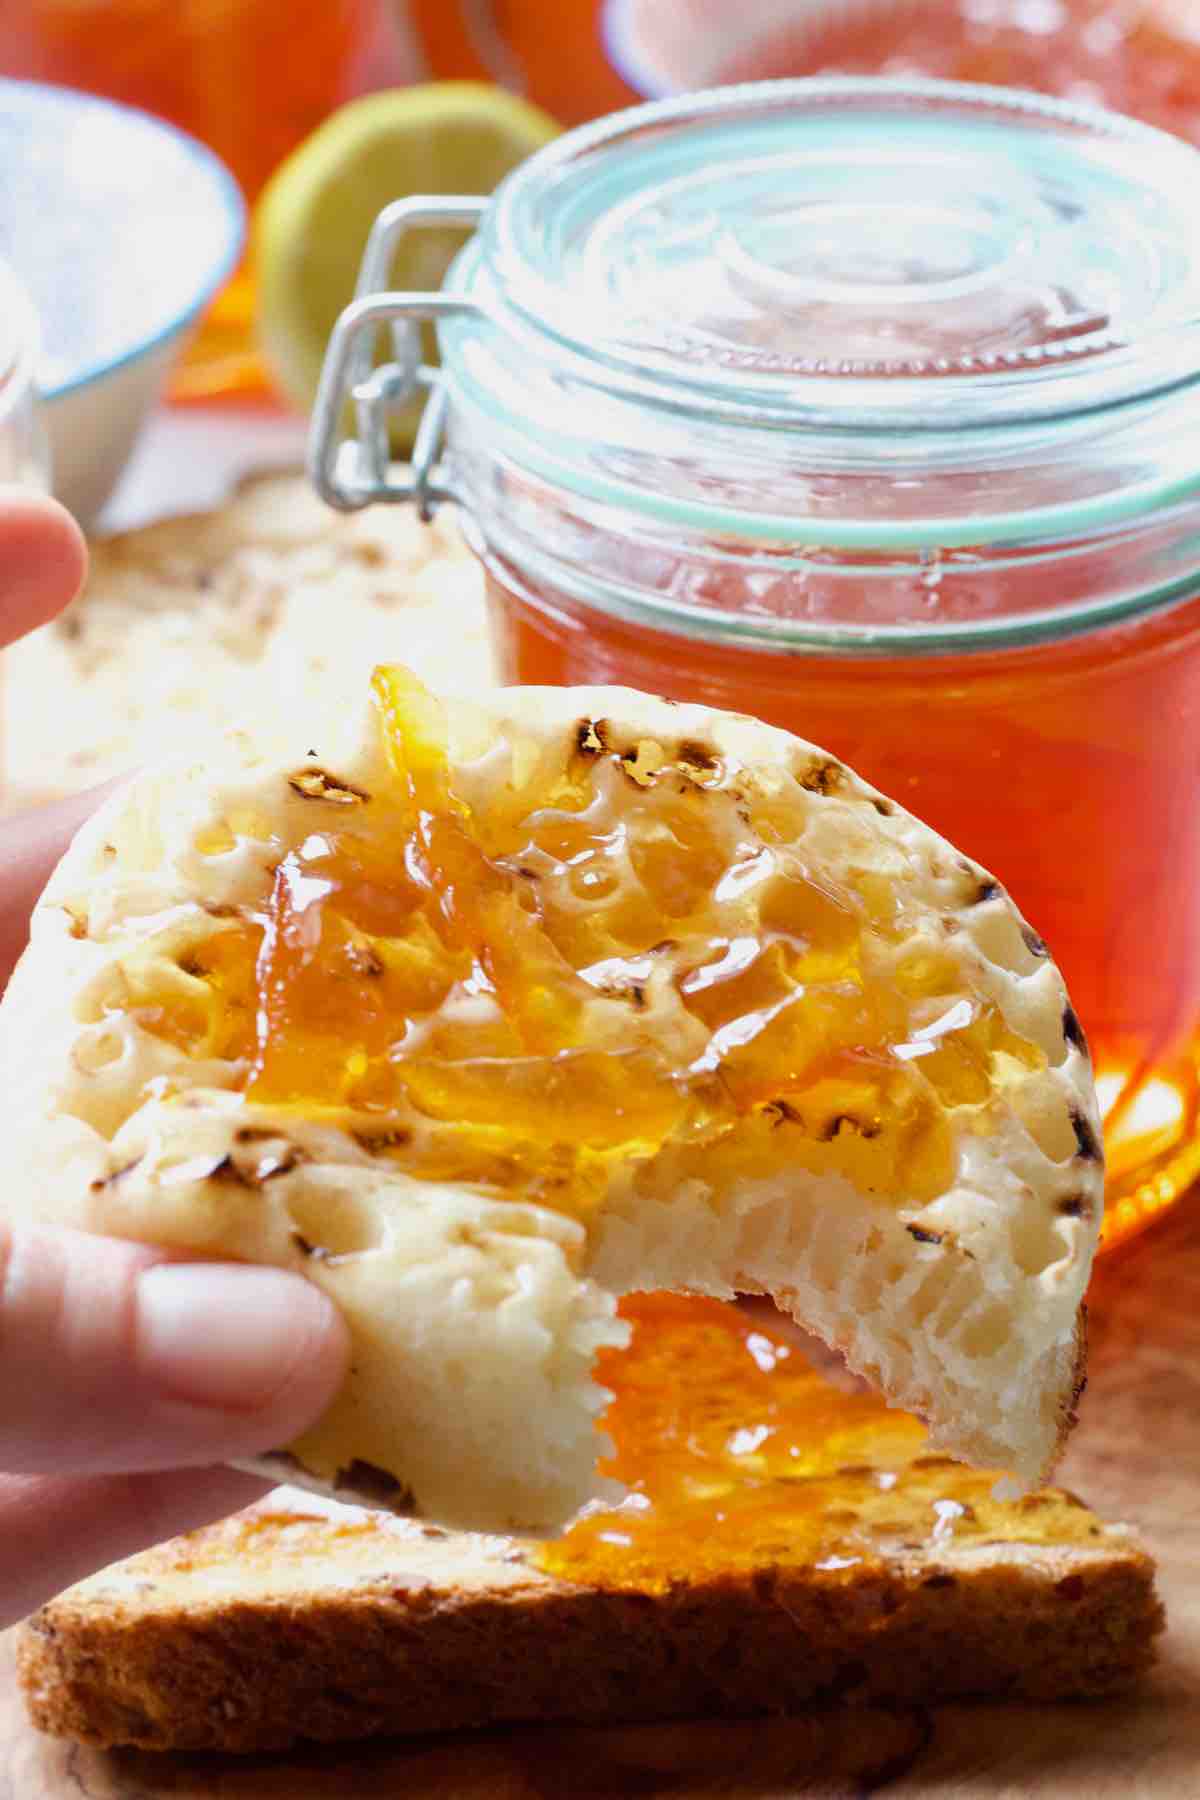 Crumpet with marmalade with bite taken out of it.